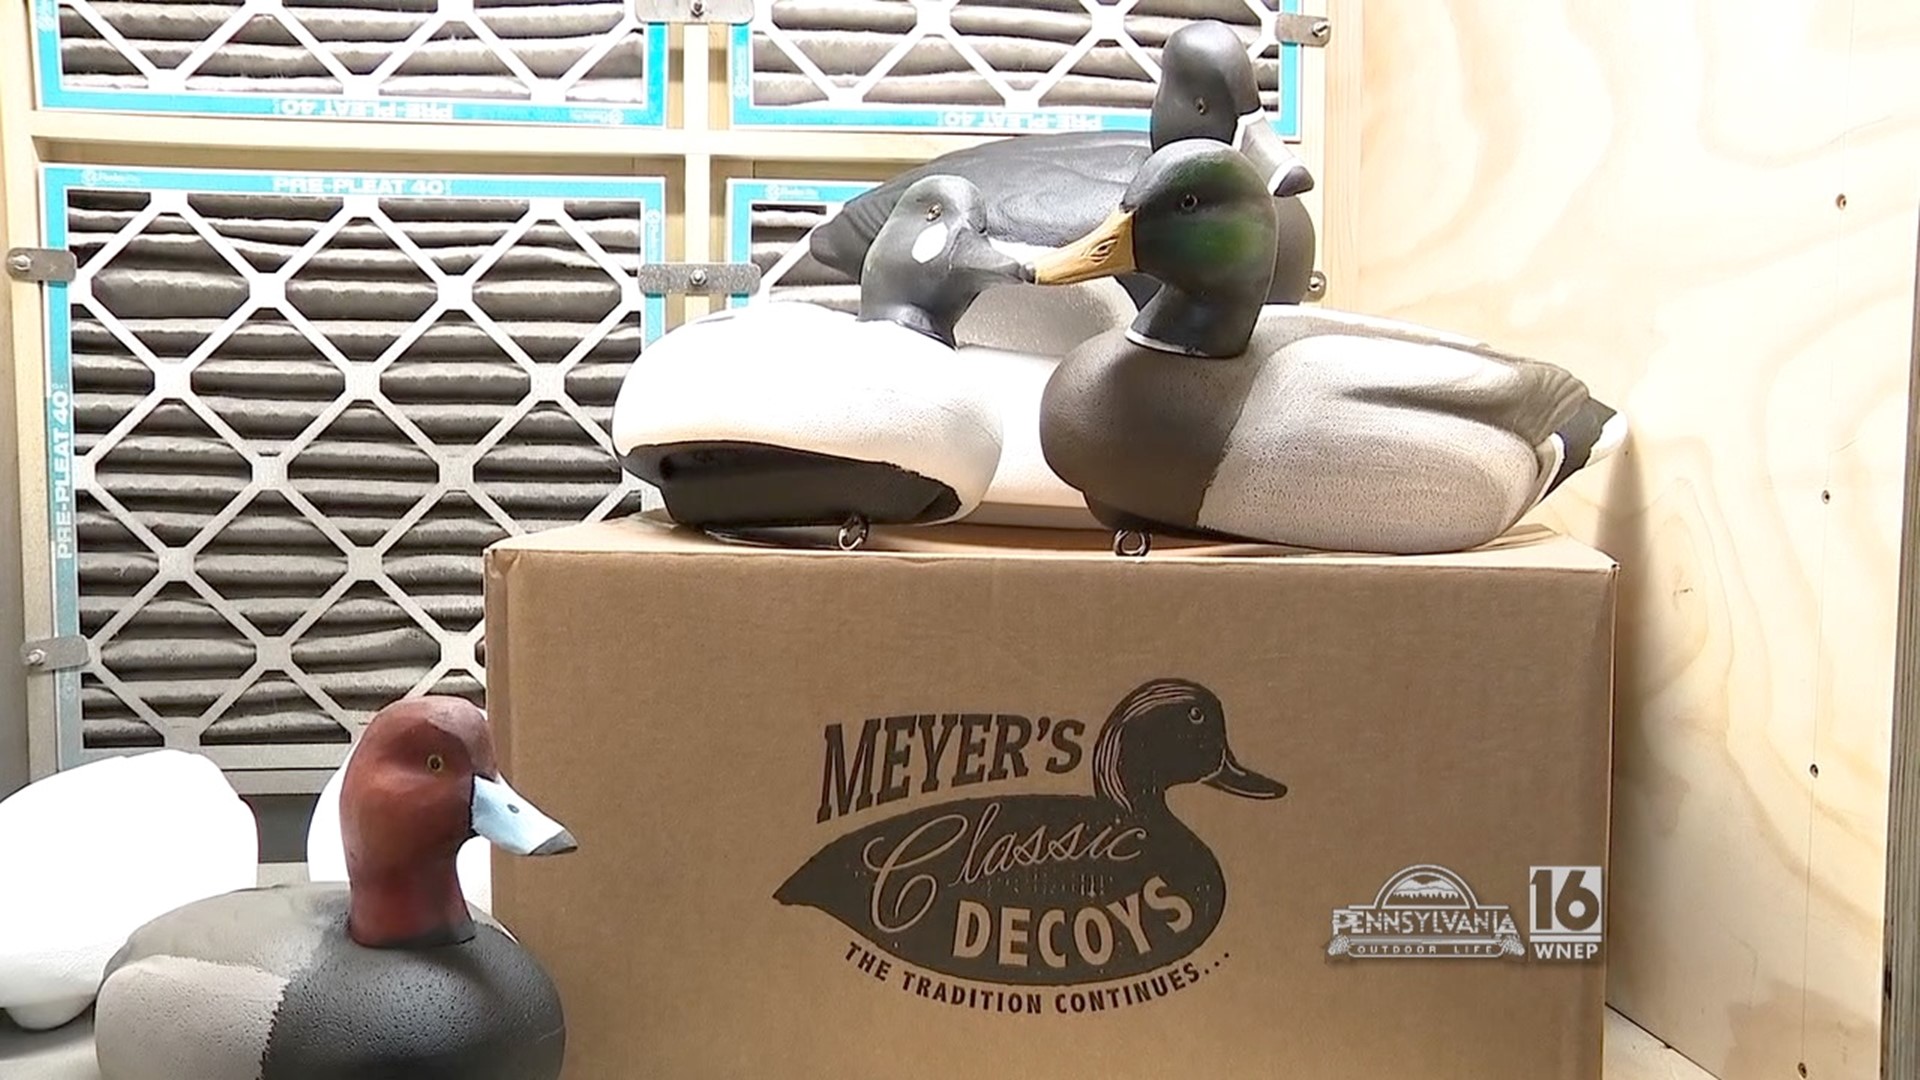 If you shoot this decoy don't worry, they FLOAT!!